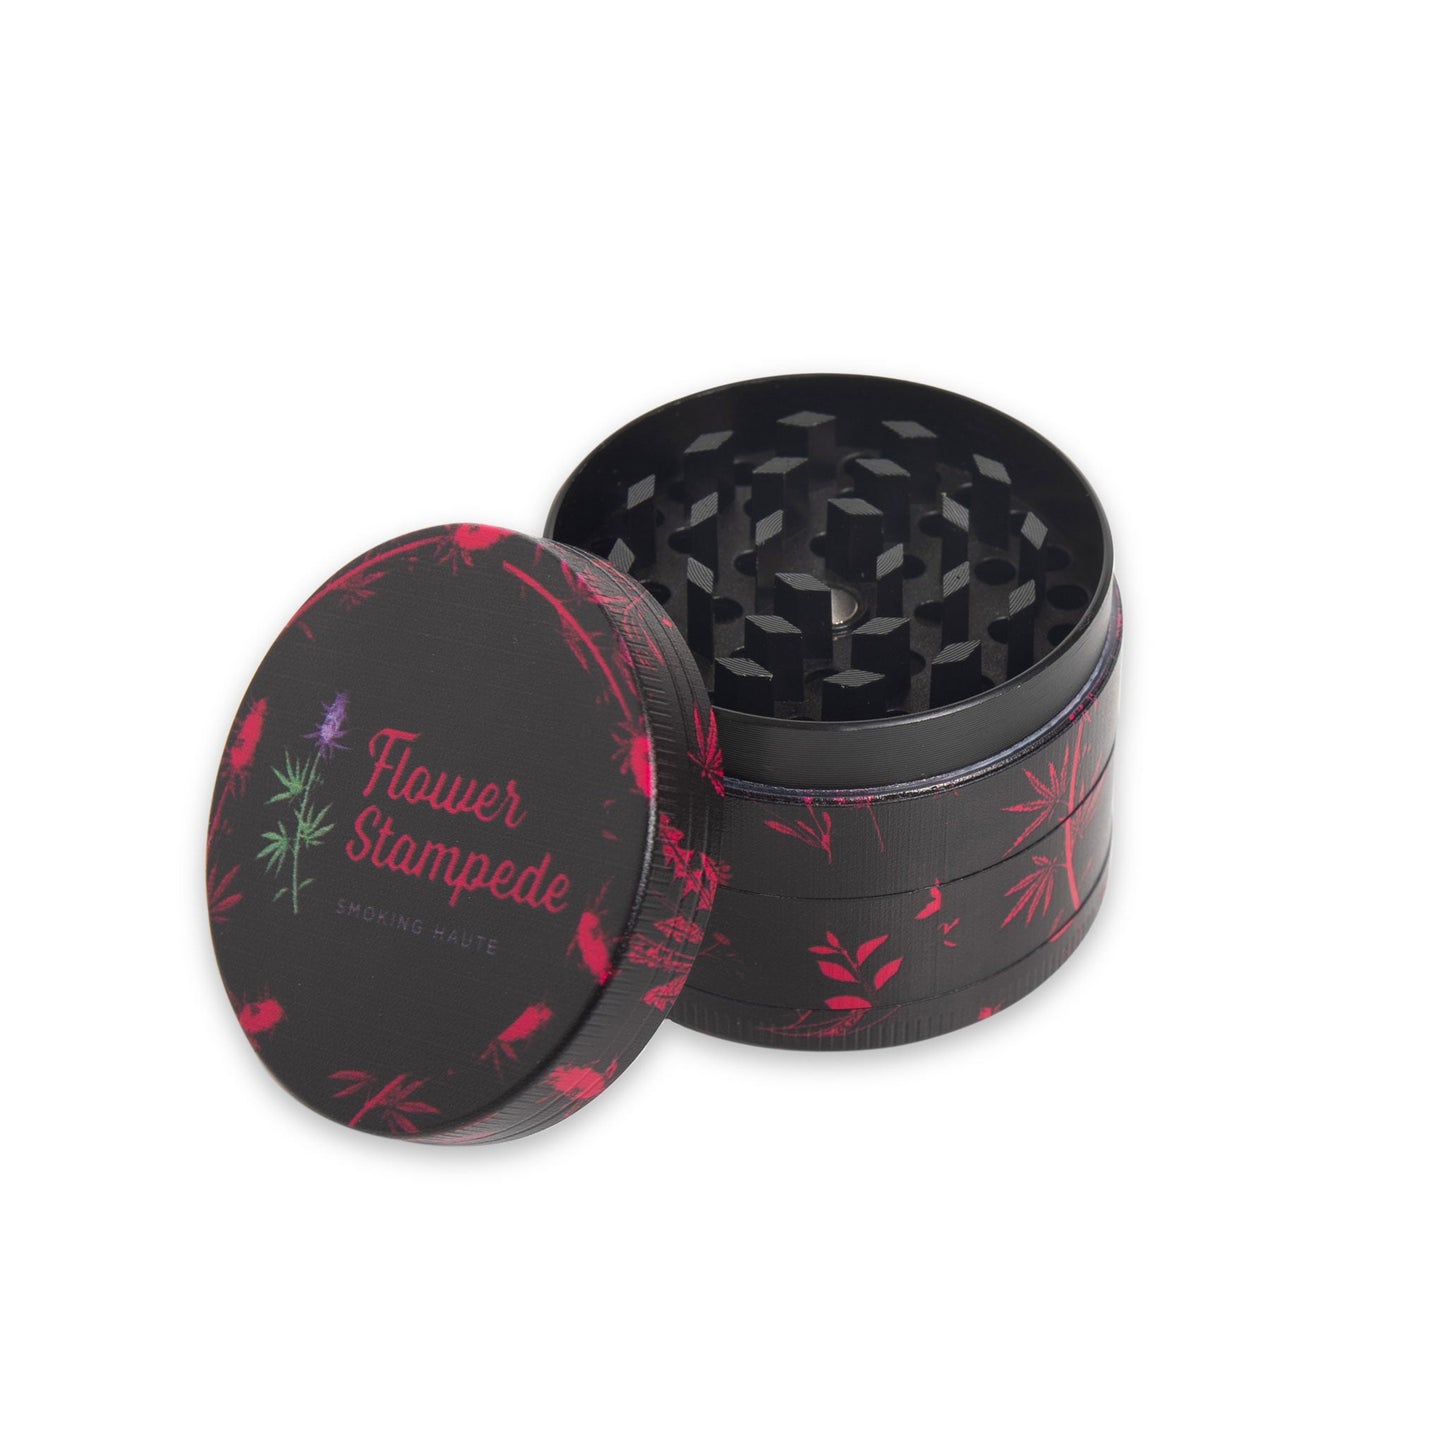 Flower Stampede Deluxe Sesh Set - Rolling Tray, 4-Layer Grinder, Magnetic Spoon Pipe